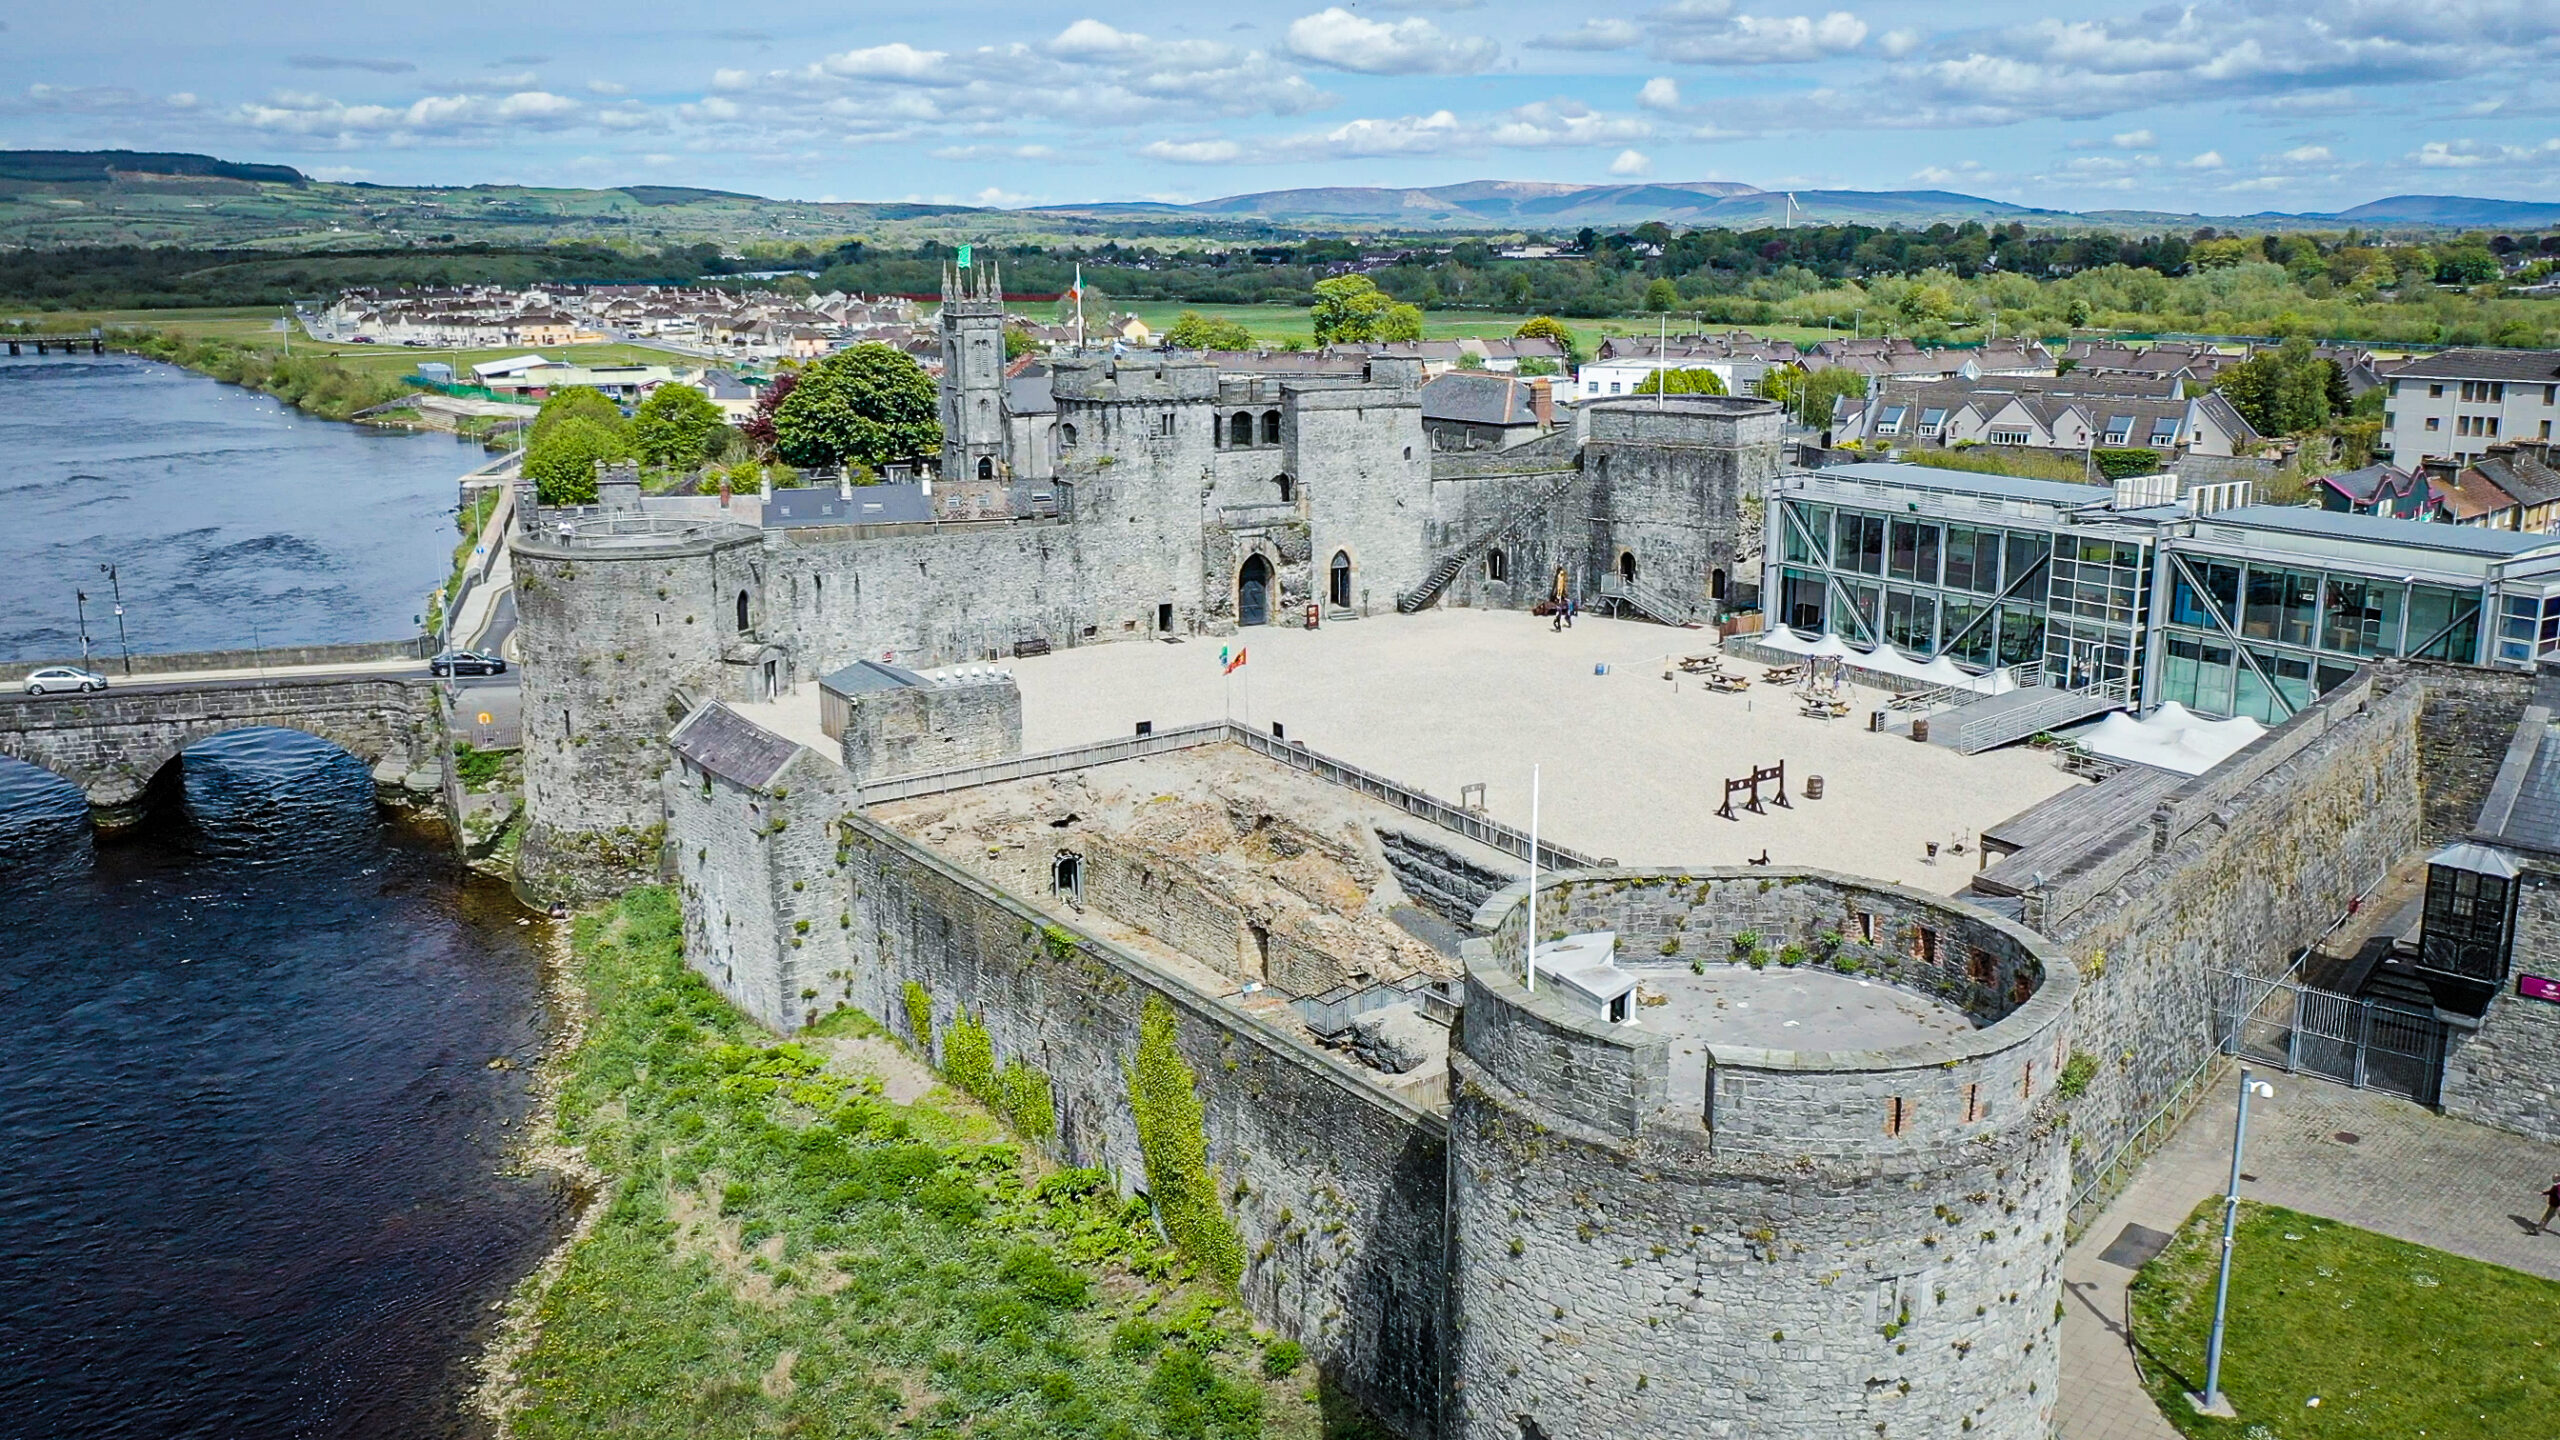 King Johns Castle receives funding of more than King John's Castle receives funding of more than €2 million. An aerial shot of King John's Castle